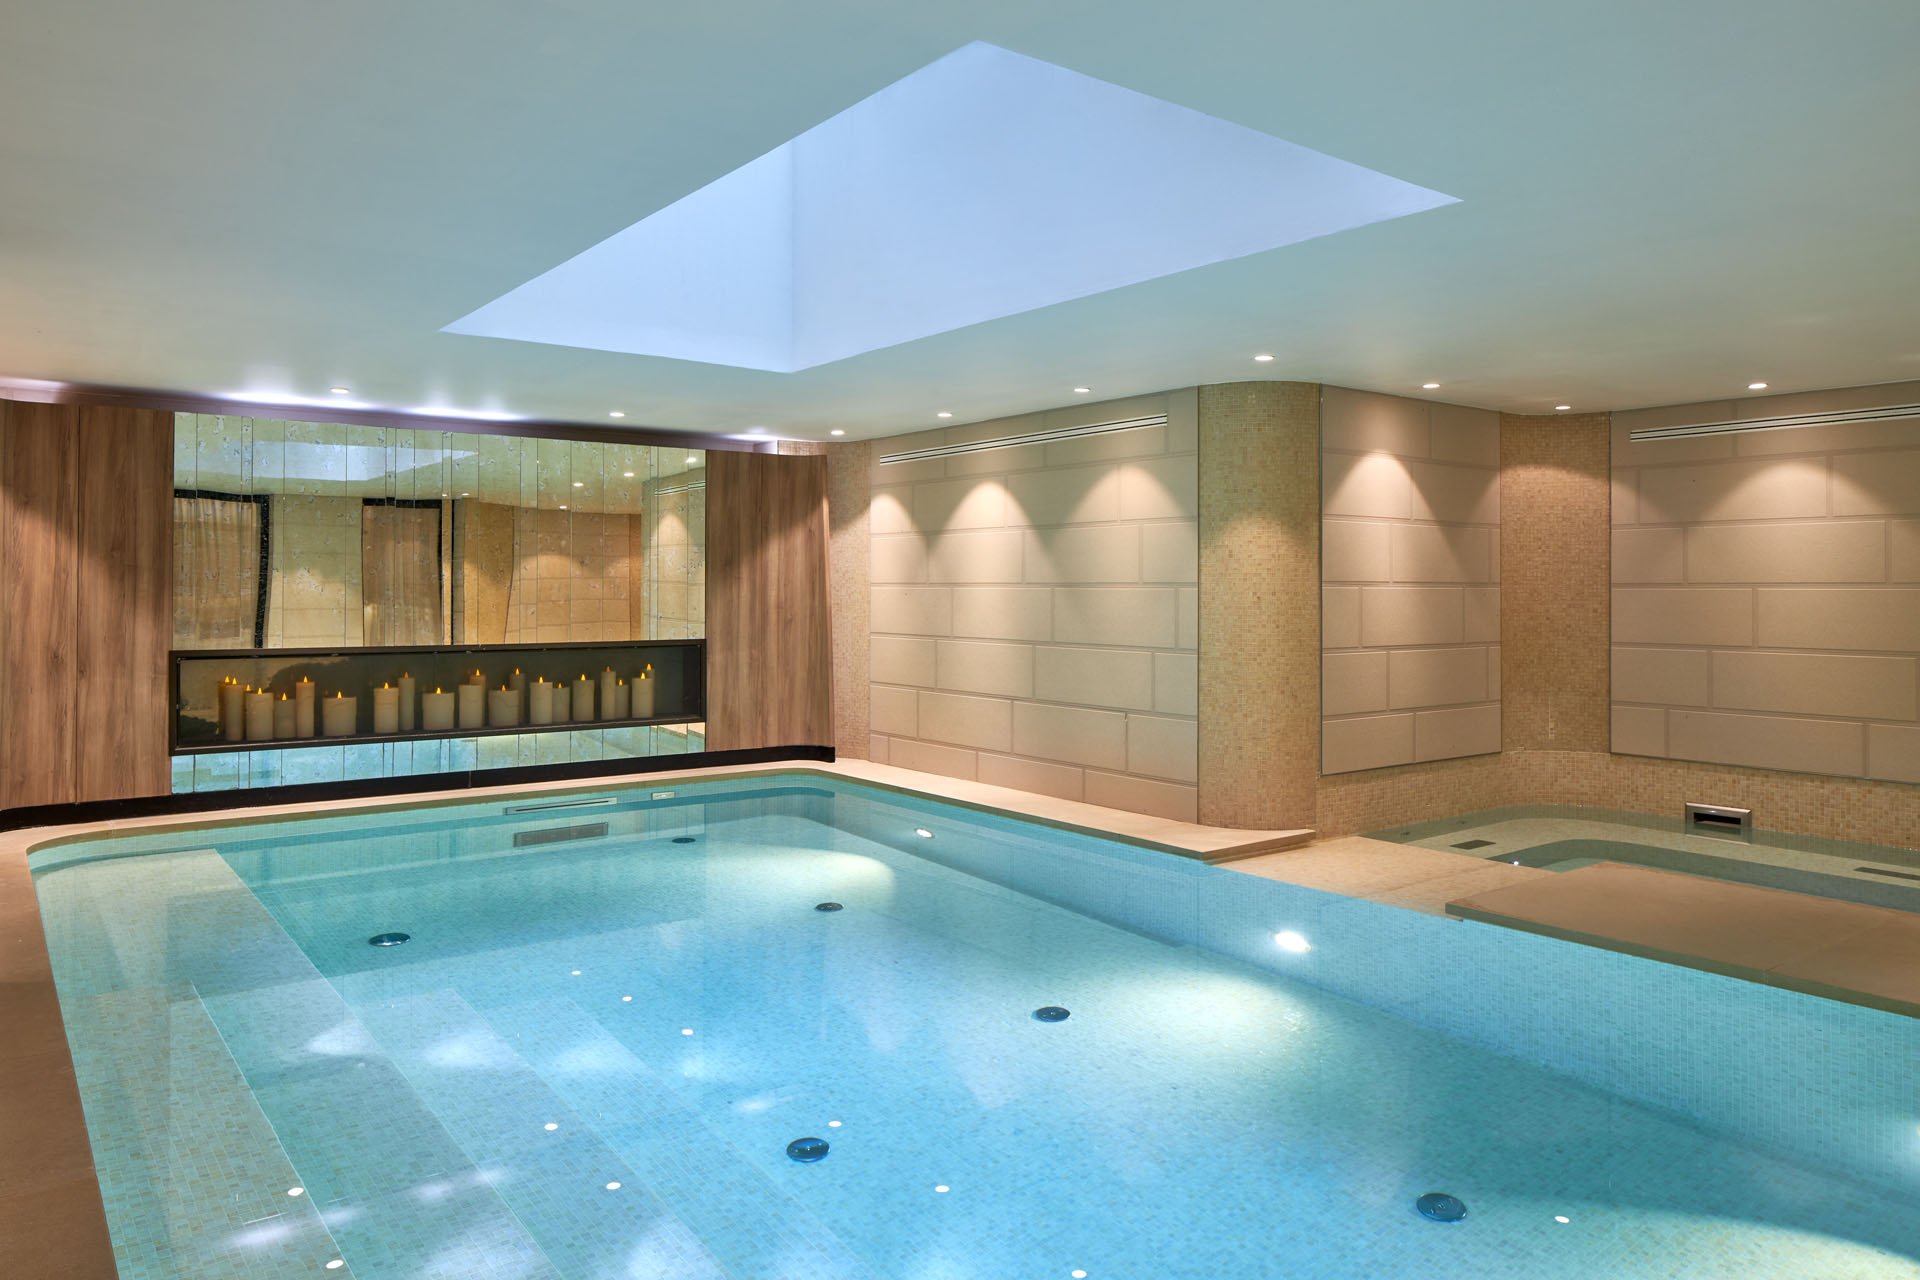 Maison Albar Hotels Le Pont-Neuf indoor swimming pool Spa Pont-Neuf by Cinq Mondes